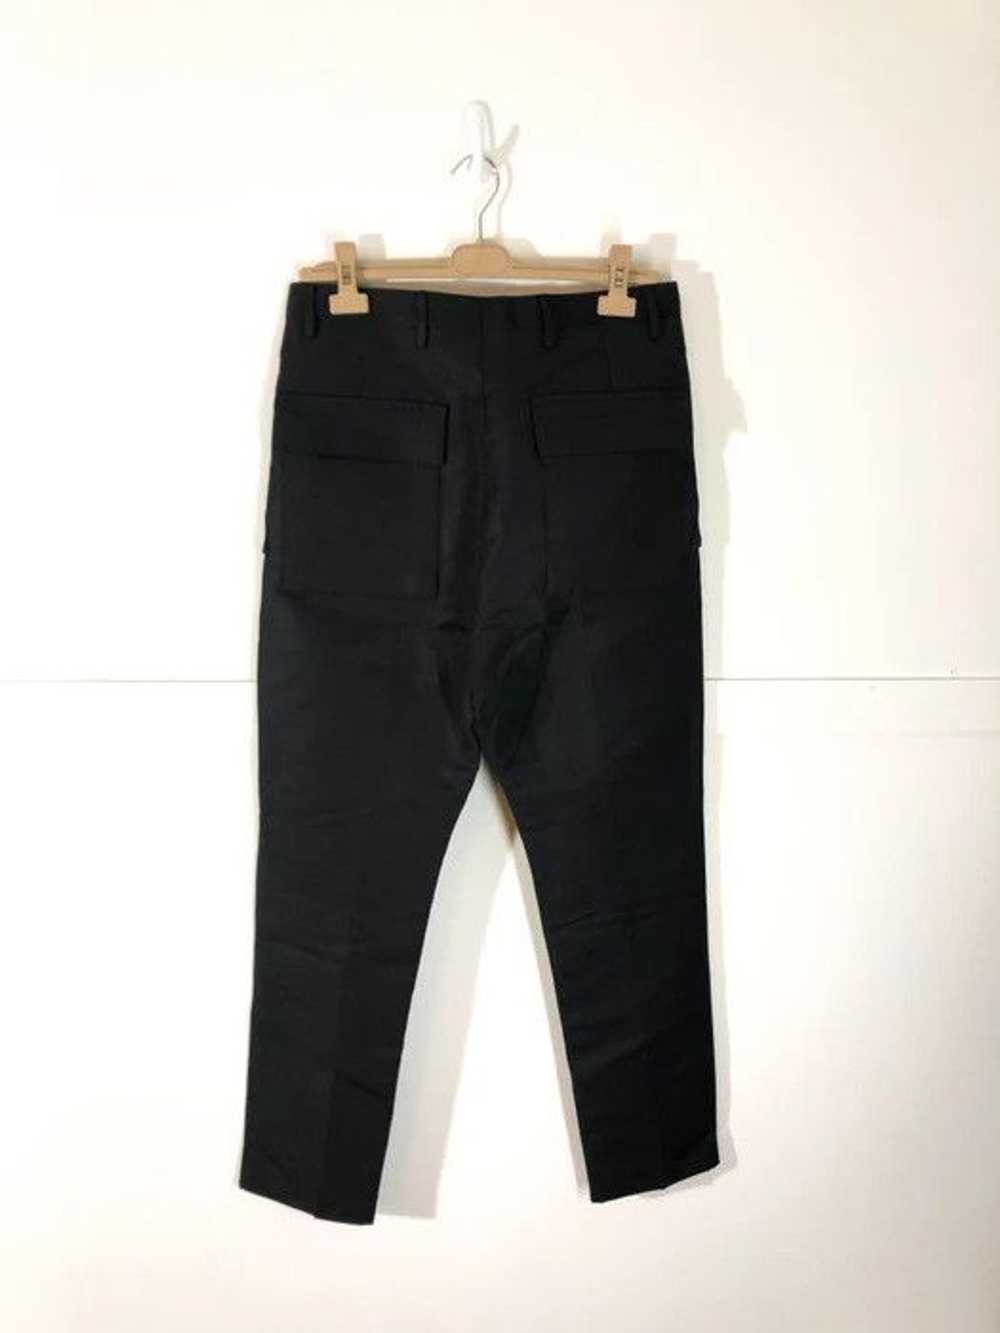 Rick Owens Tapered Trousers - image 2